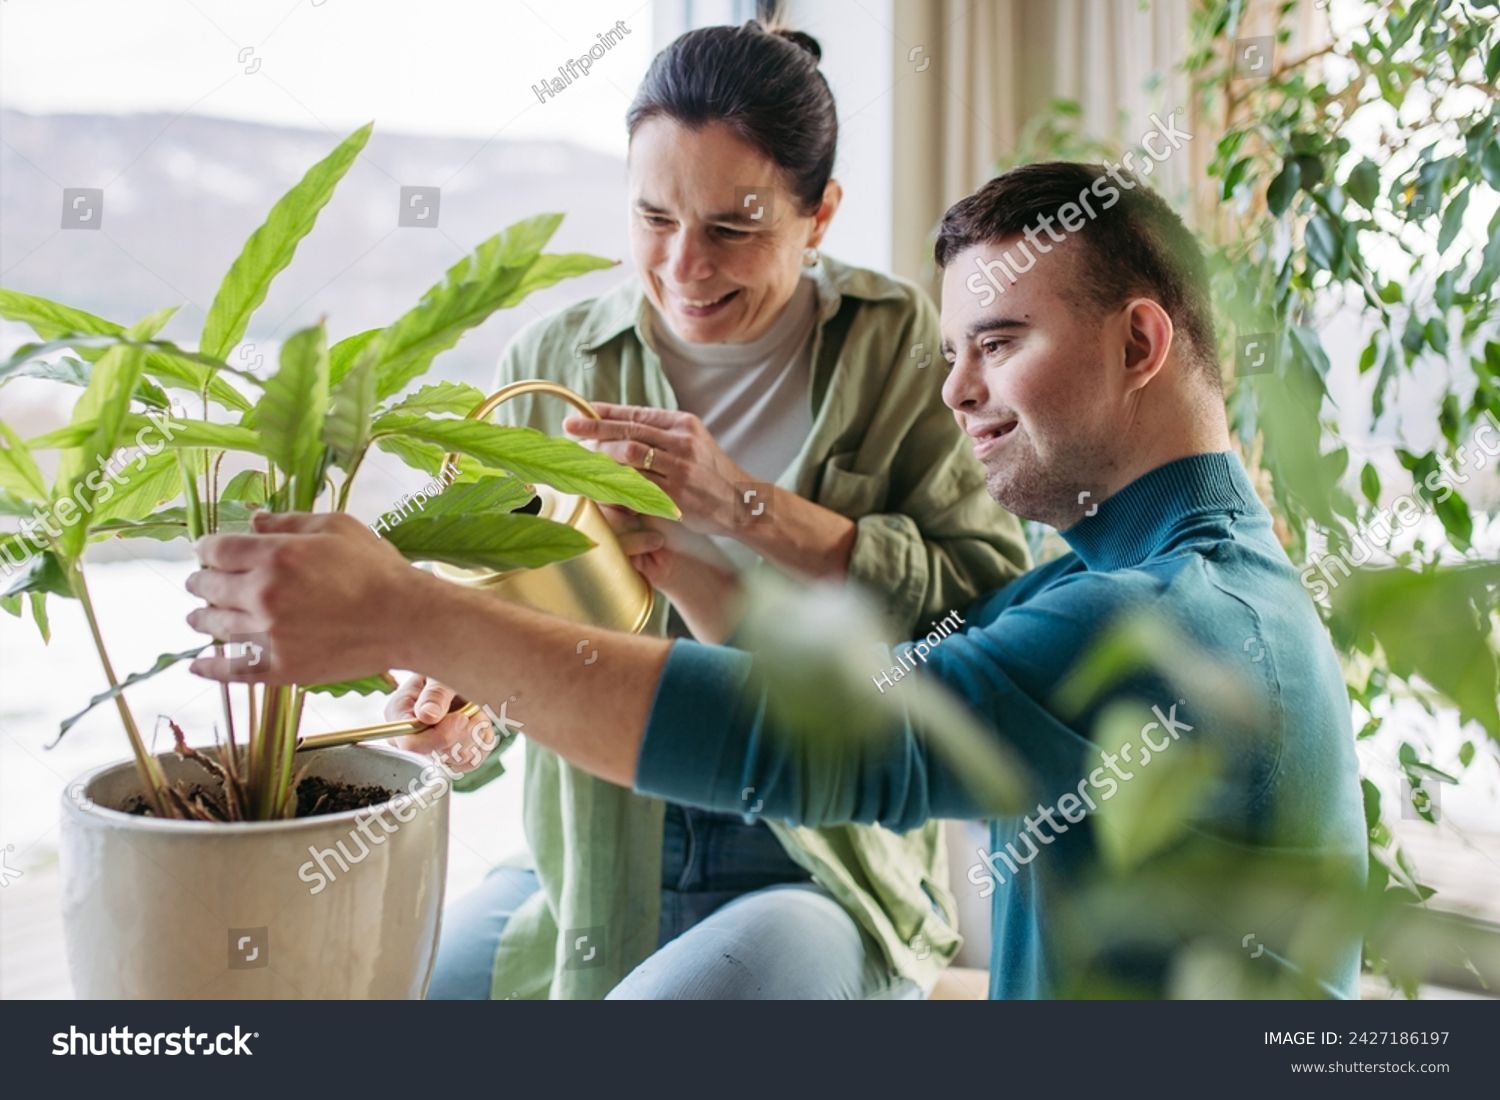 Portrait of young man with Down syndrome with his mother at home, taking care of plants. Concept of love and parenting disabled child. #2427186197